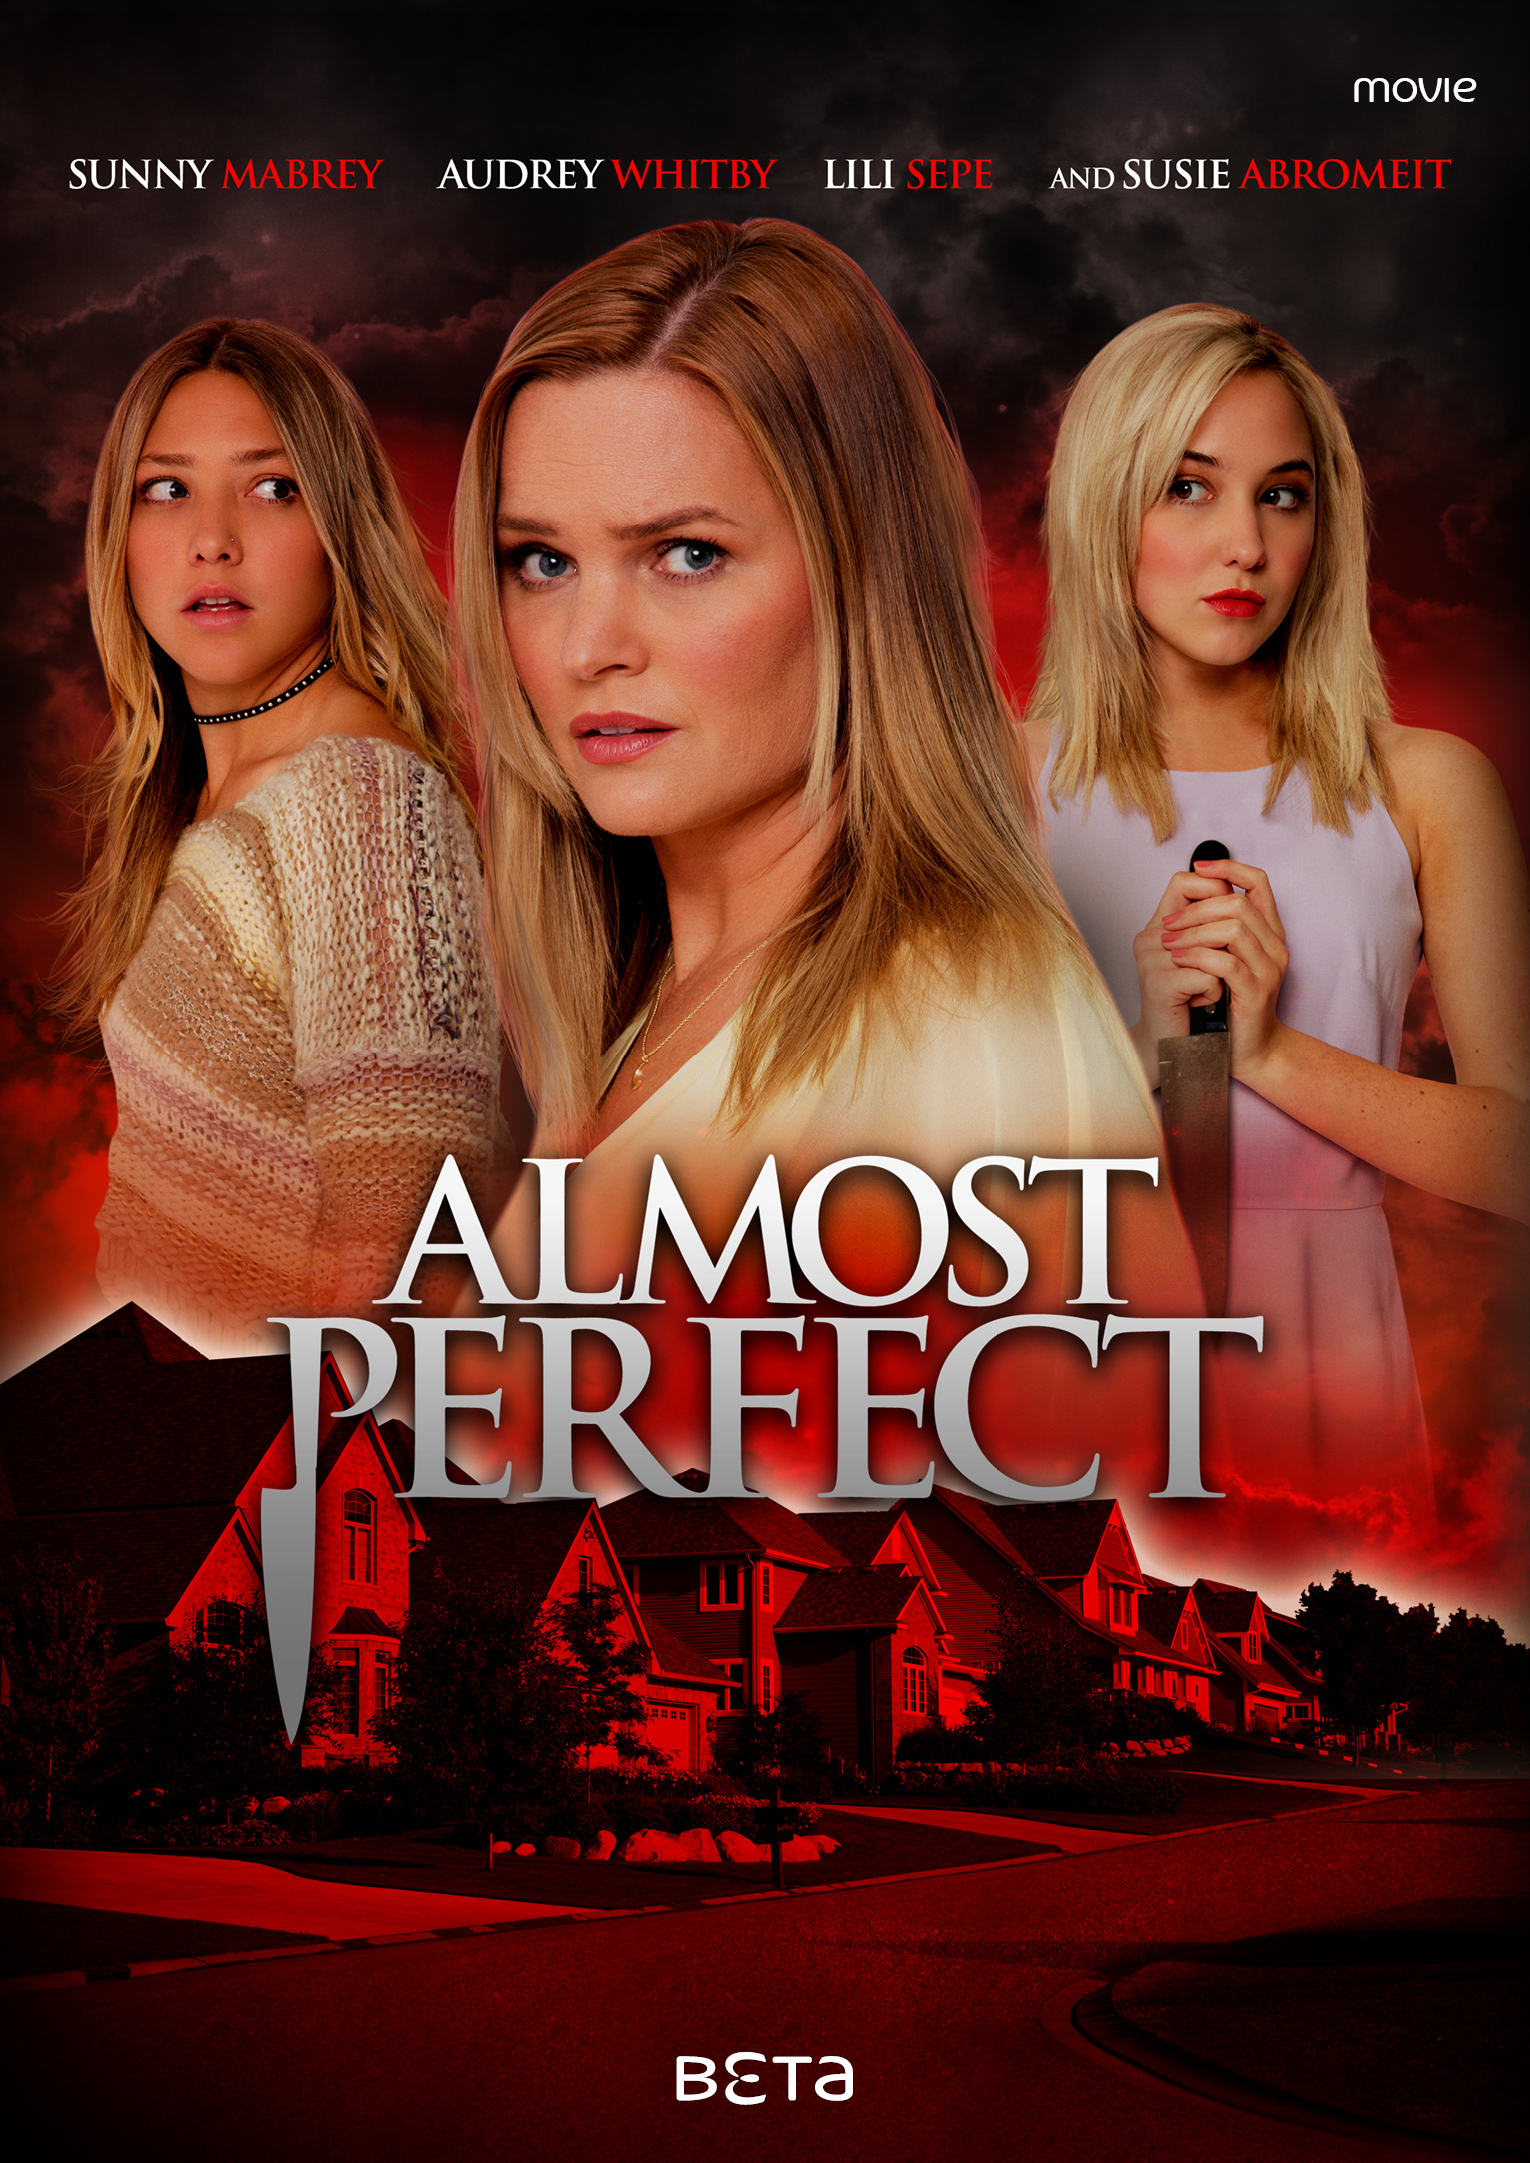 The Perfect Mother (2018) starring Sunny Mabrey on DVD on DVD